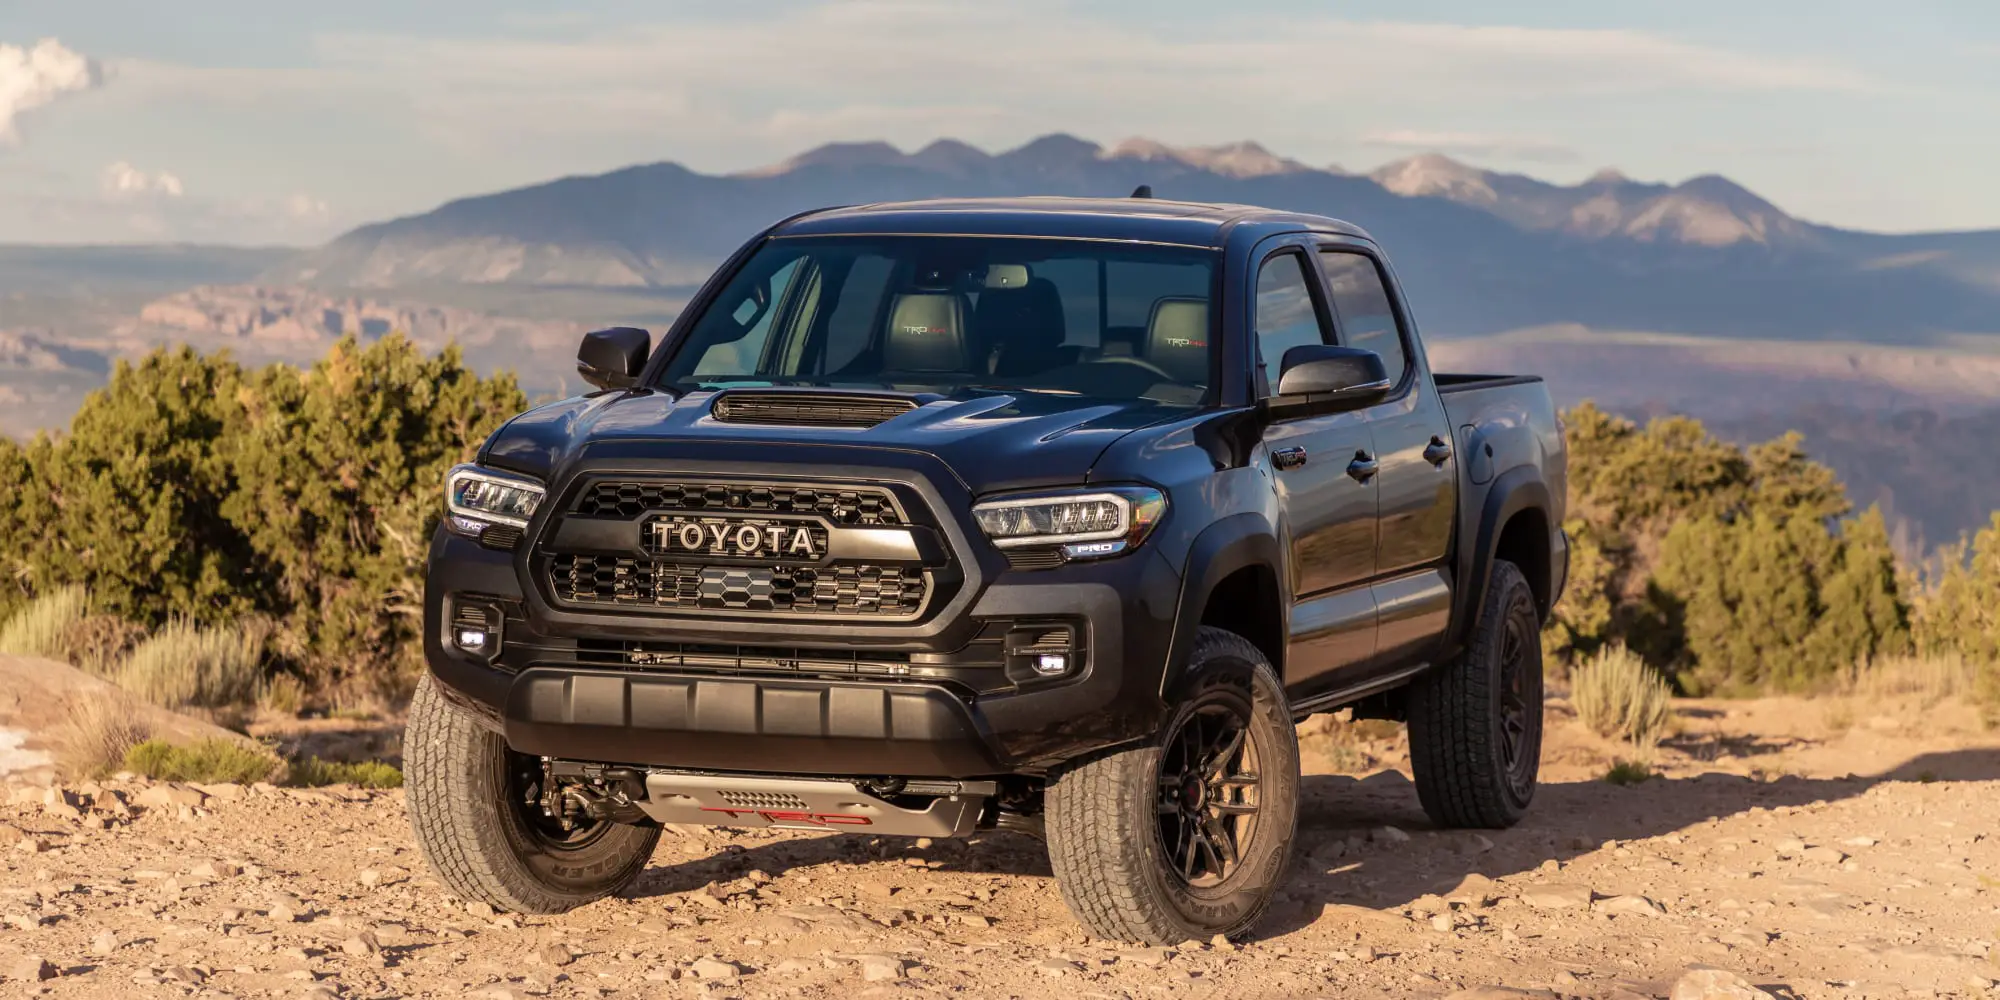 Toyota vs Tundra Which Pickup Is Better? Motorborne